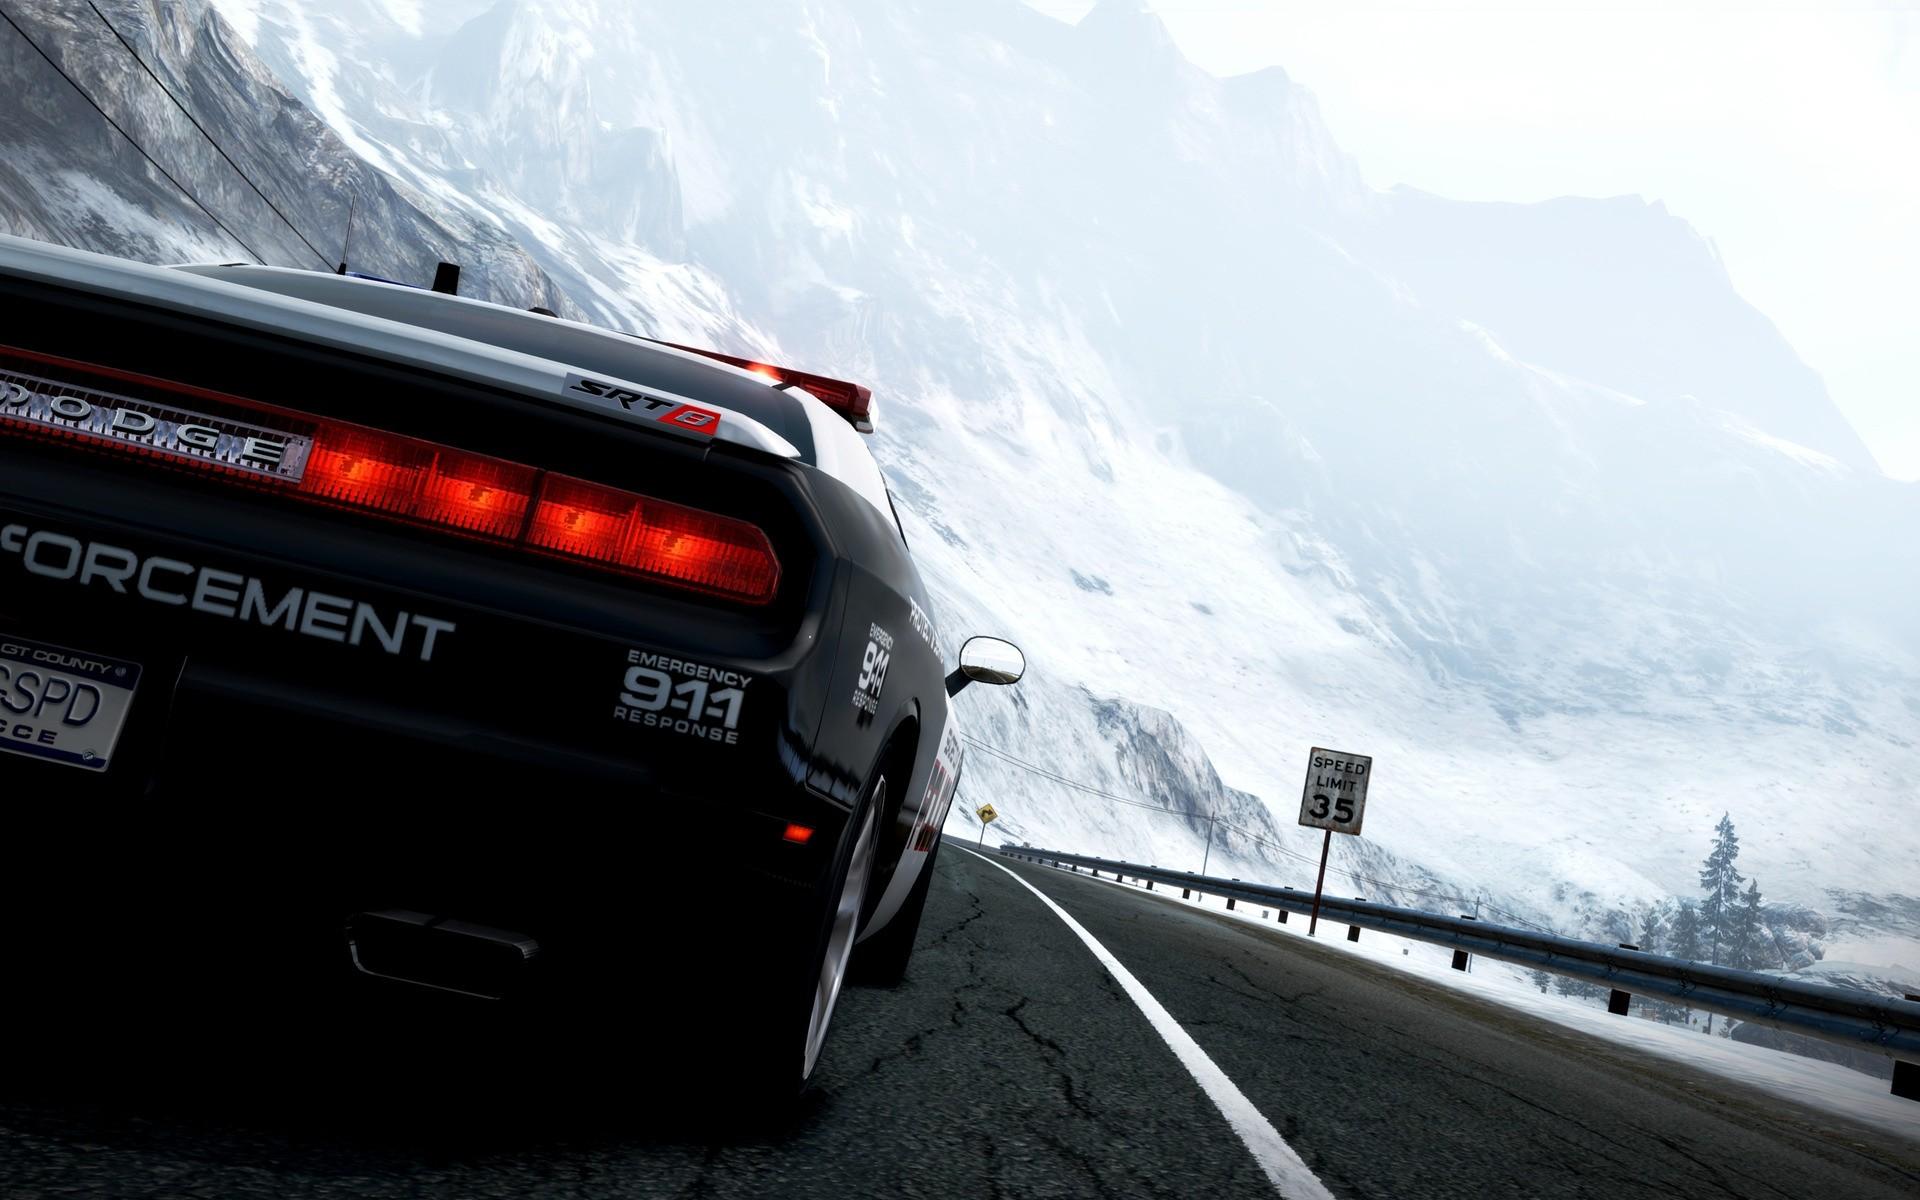 NFS Hot Pursuit Police Car. Android wallpaper for free